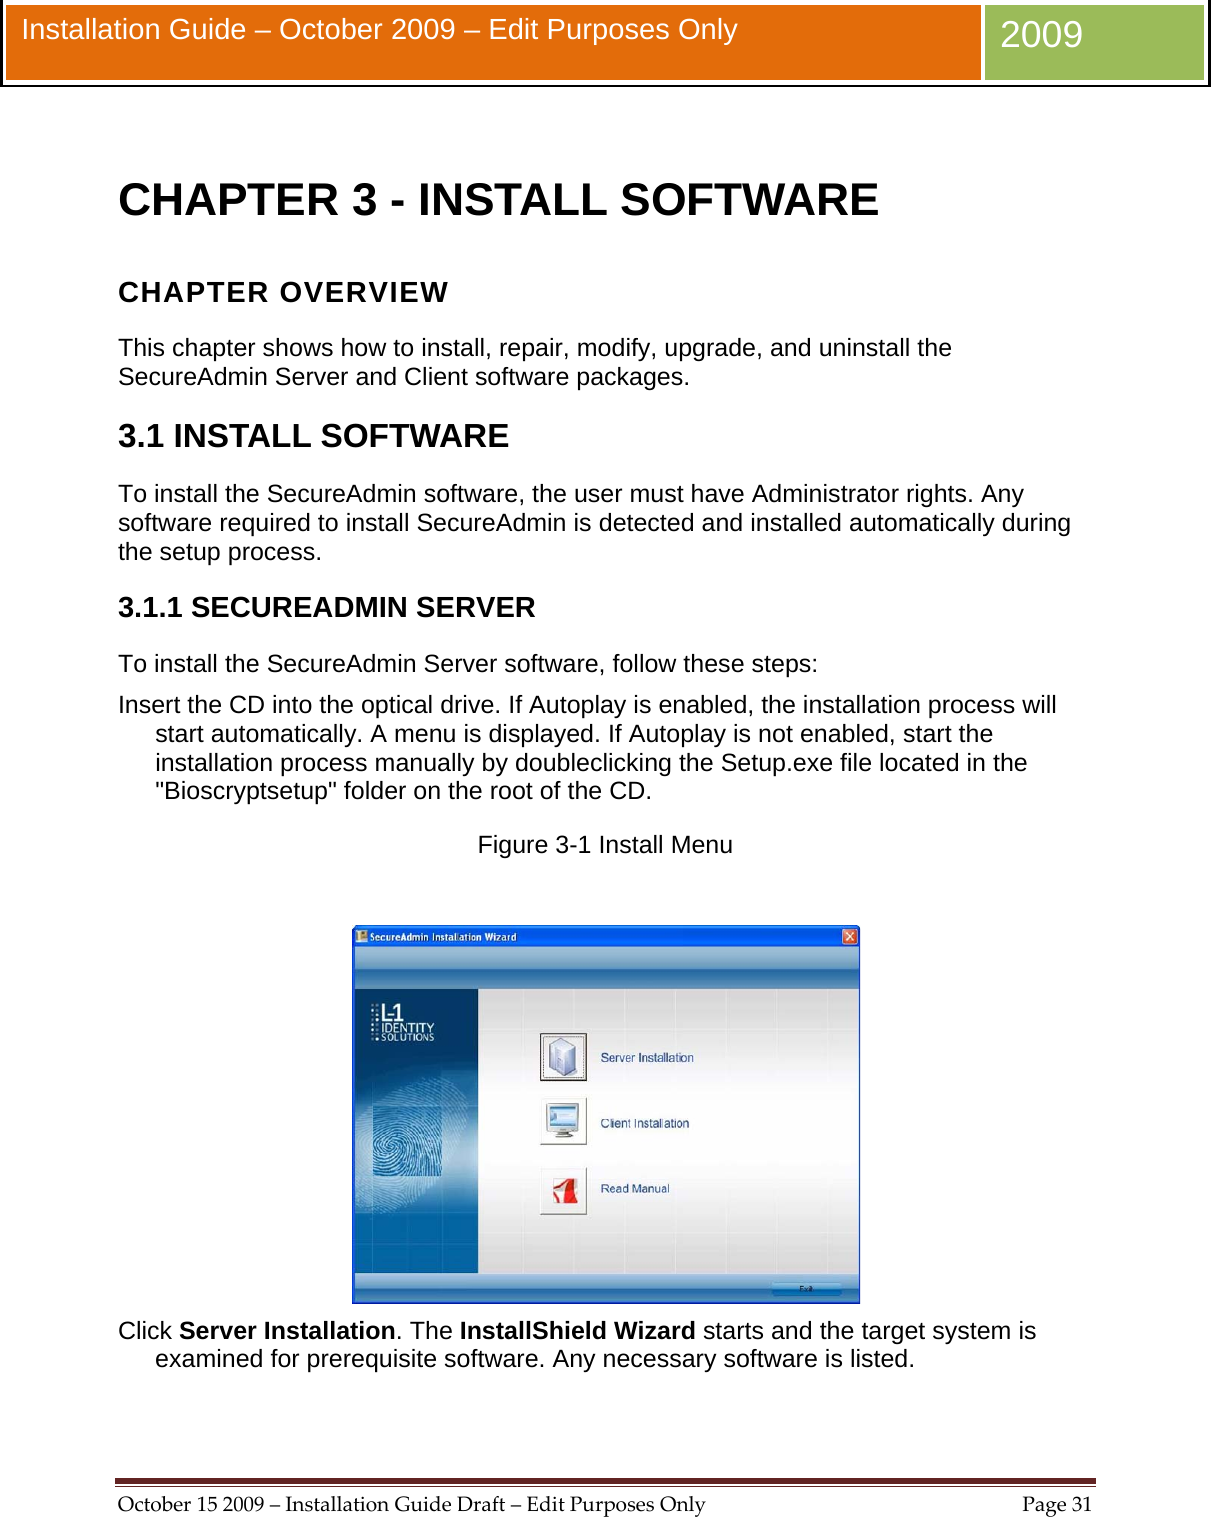  October152009–InstallationGuideDraft–EditPurposesOnlyPage31 Installation Guide – October 2009 – Edit Purposes Only  2009  CHAPTER 3 - INSTALL SOFTWARE CHAPTER OVERVIEW This chapter shows how to install, repair, modify, upgrade, and uninstall the SecureAdmin Server and Client software packages. 3.1 INSTALL SOFTWARE To install the SecureAdmin software, the user must have Administrator rights. Any software required to install SecureAdmin is detected and installed automatically during the setup process. 3.1.1 SECUREADMIN SERVER To install the SecureAdmin Server software, follow these steps: Insert the CD into the optical drive. If Autoplay is enabled, the installation process will start automatically. A menu is displayed. If Autoplay is not enabled, start the installation process manually by doubleclicking the Setup.exe file located in the &quot;Bioscryptsetup&quot; folder on the root of the CD. Figure 3-1 Install Menu   Click Server Installation. The InstallShield Wizard starts and the target system is examined for prerequisite software. Any necessary software is listed. 